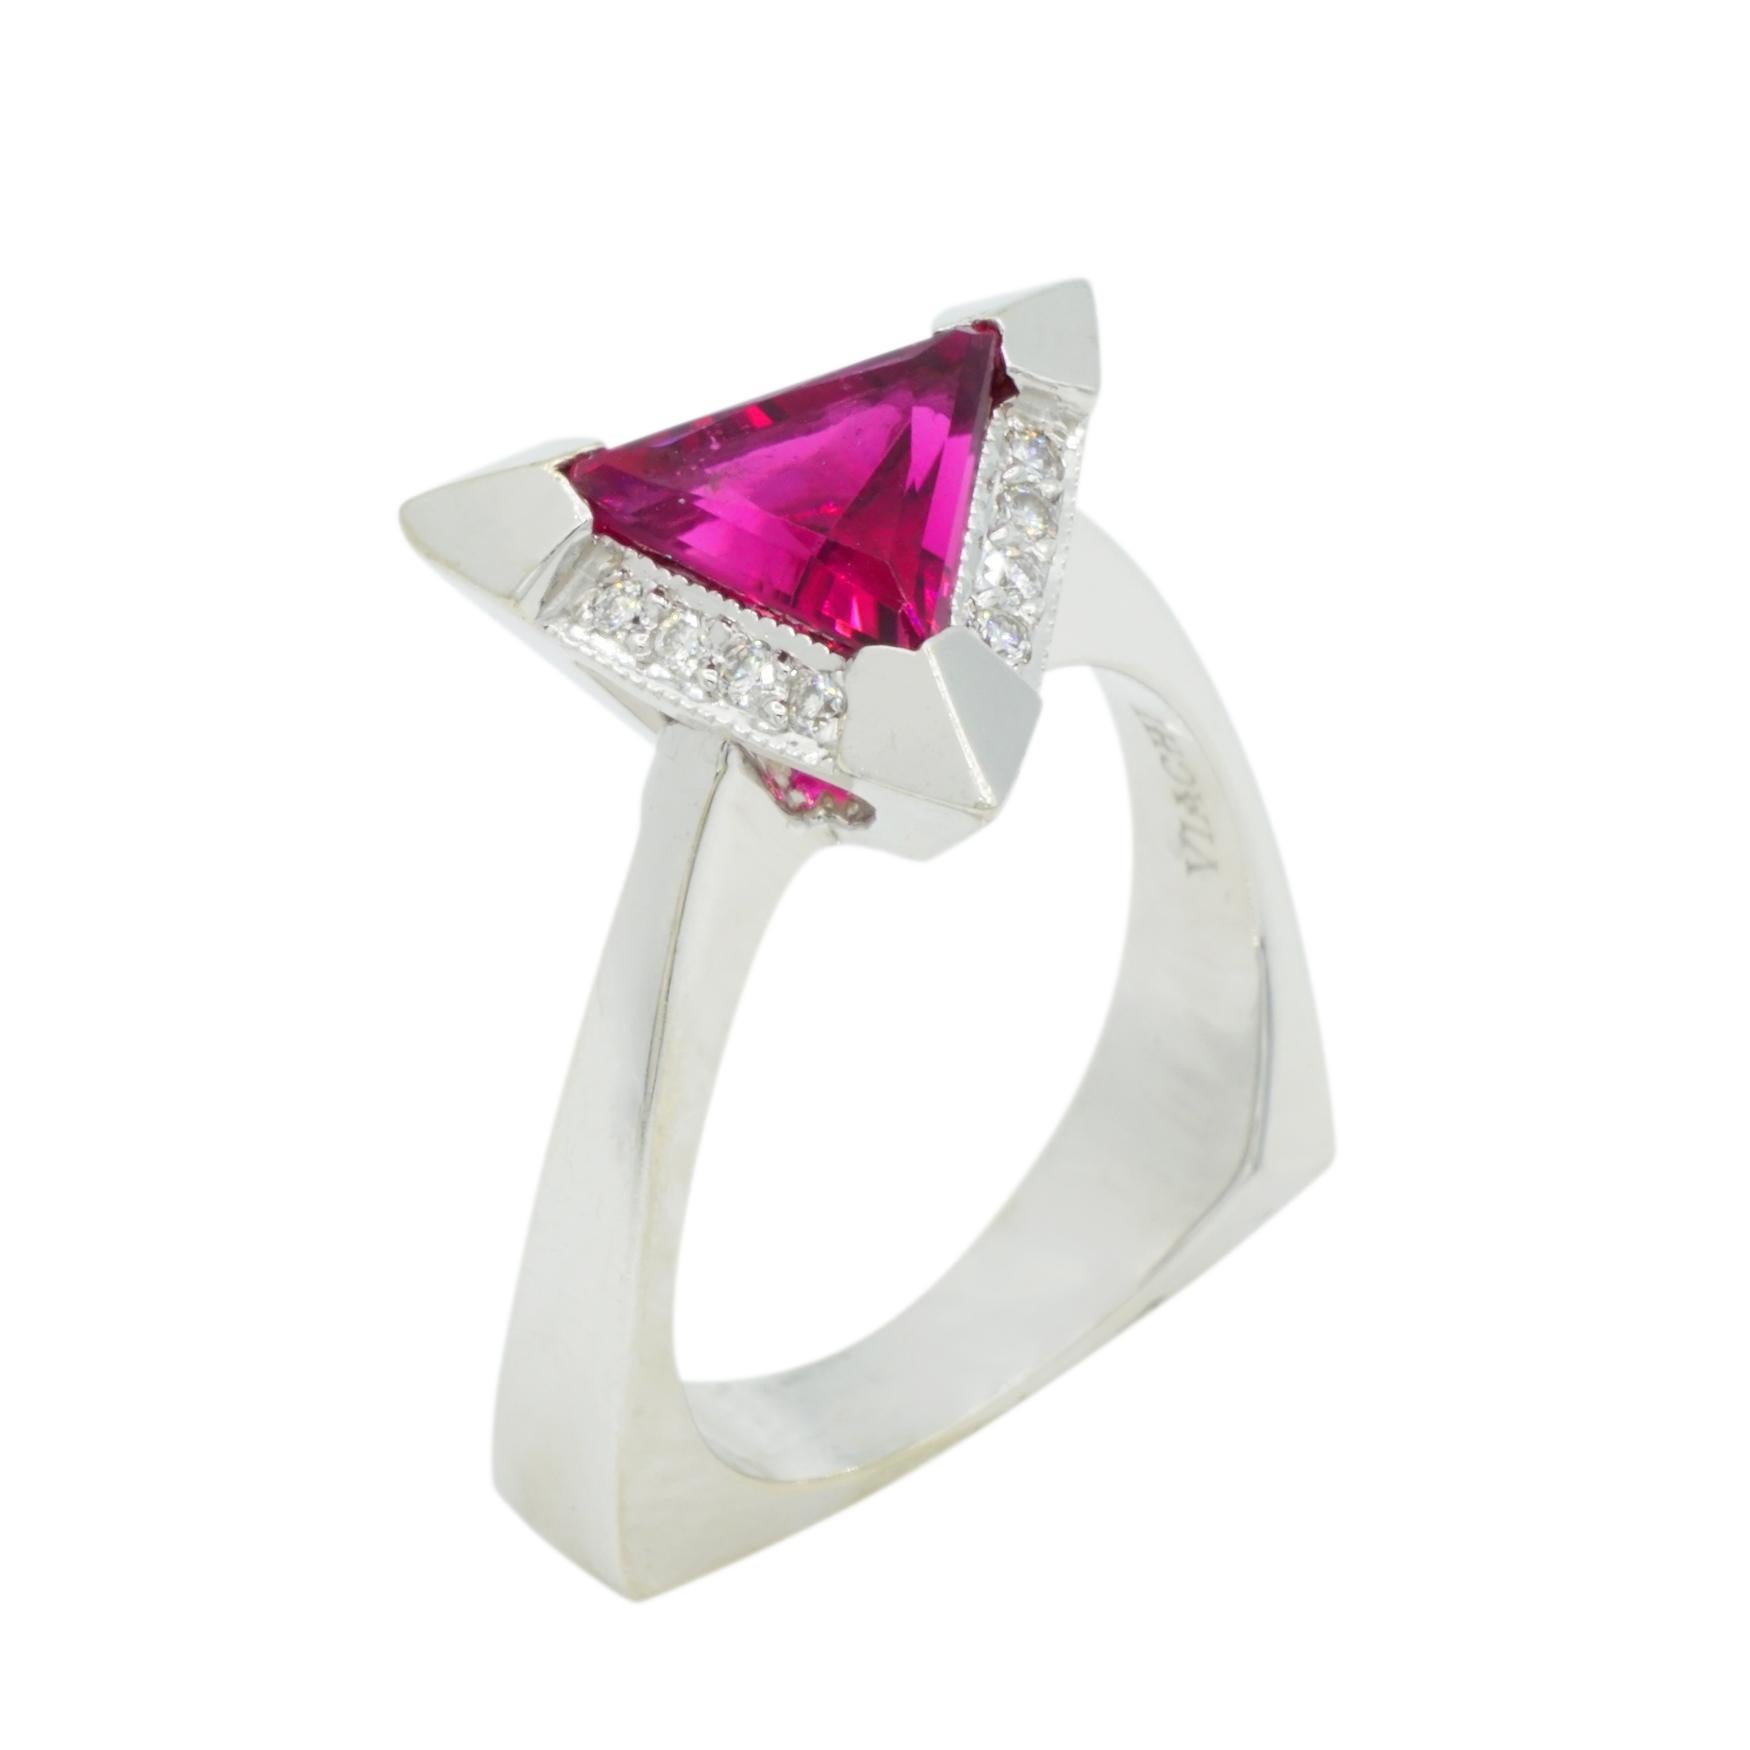 14kt White Gold Trilliant Rubelite and Diamond Ring Designer Viachi. New 14kt white gold 1.67ct triangle rubelite and .12cttw diamond ring designer VIACHI.  This ring is hand crafted with the highest in quality and workmanship. This ring makes a